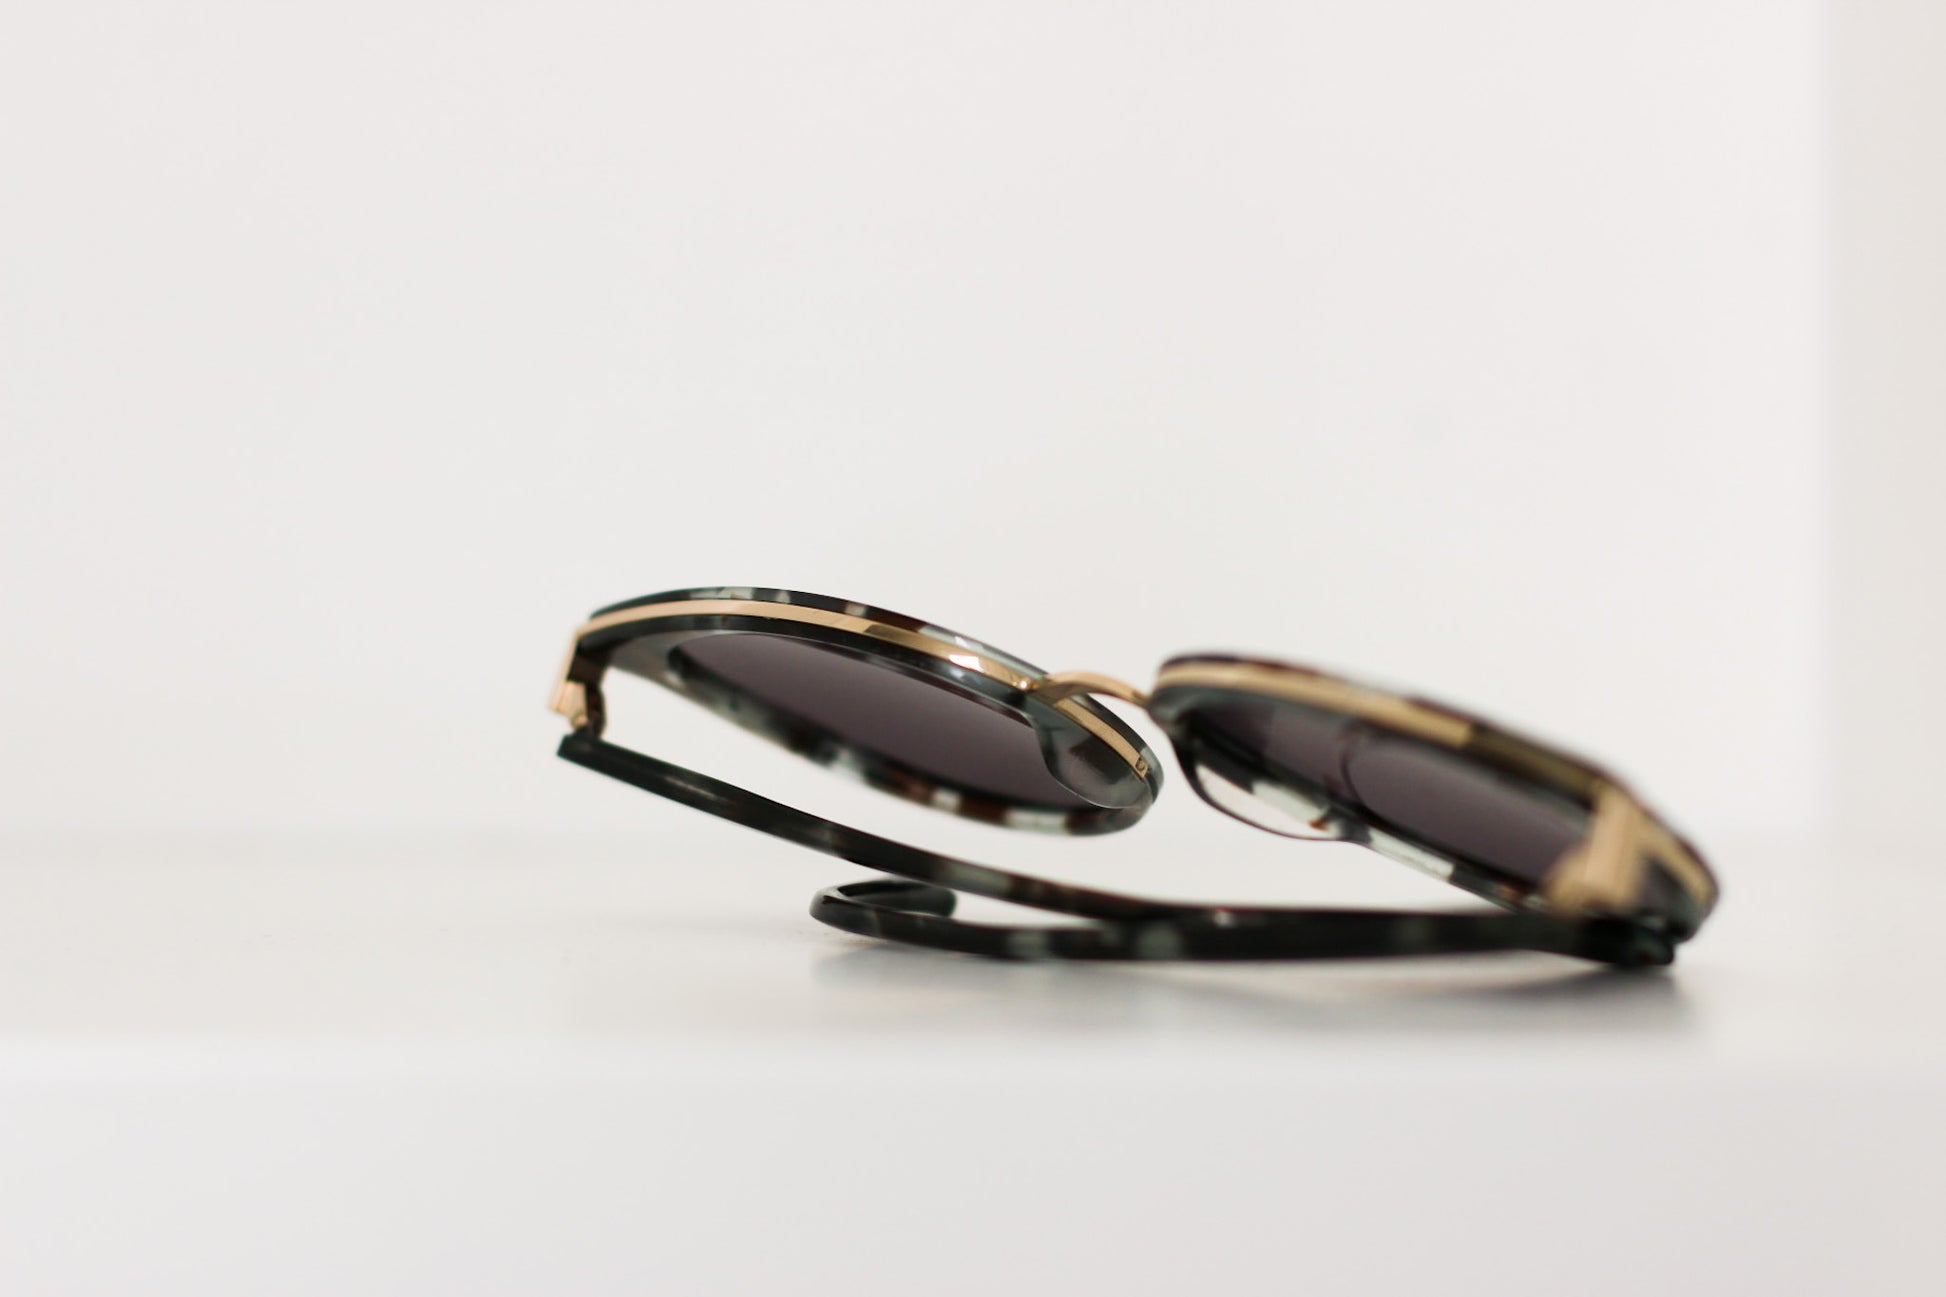 Limited Edition Nottingham Sunglasses with dark green tortoise color acetate and adjustable ear arms, showcasing the high-end designer detailing the gold bar across top of frame..